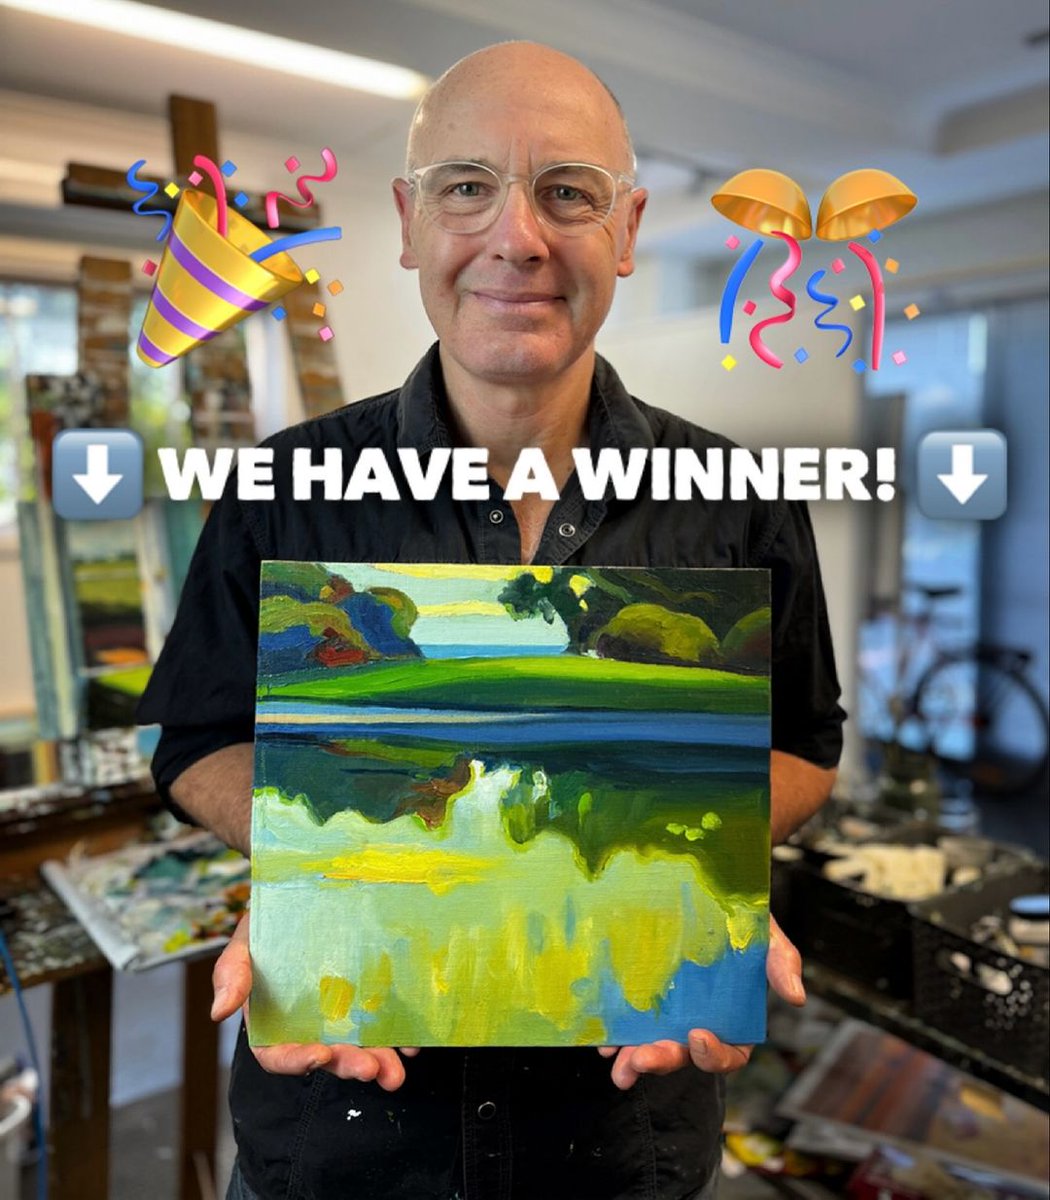 🎉Exciting news! We have a winner for my “Cloudlake” painting giveaway! Congratulations to Erin M. from Maine, USA 🇺🇸! Erin's reaction: “Oh my goodness! That’s amazing! I never win things. You’ve made my week!” Stay tuned for more giveaways!🎨 #ArtGiveaway #WinnerAnnouncement